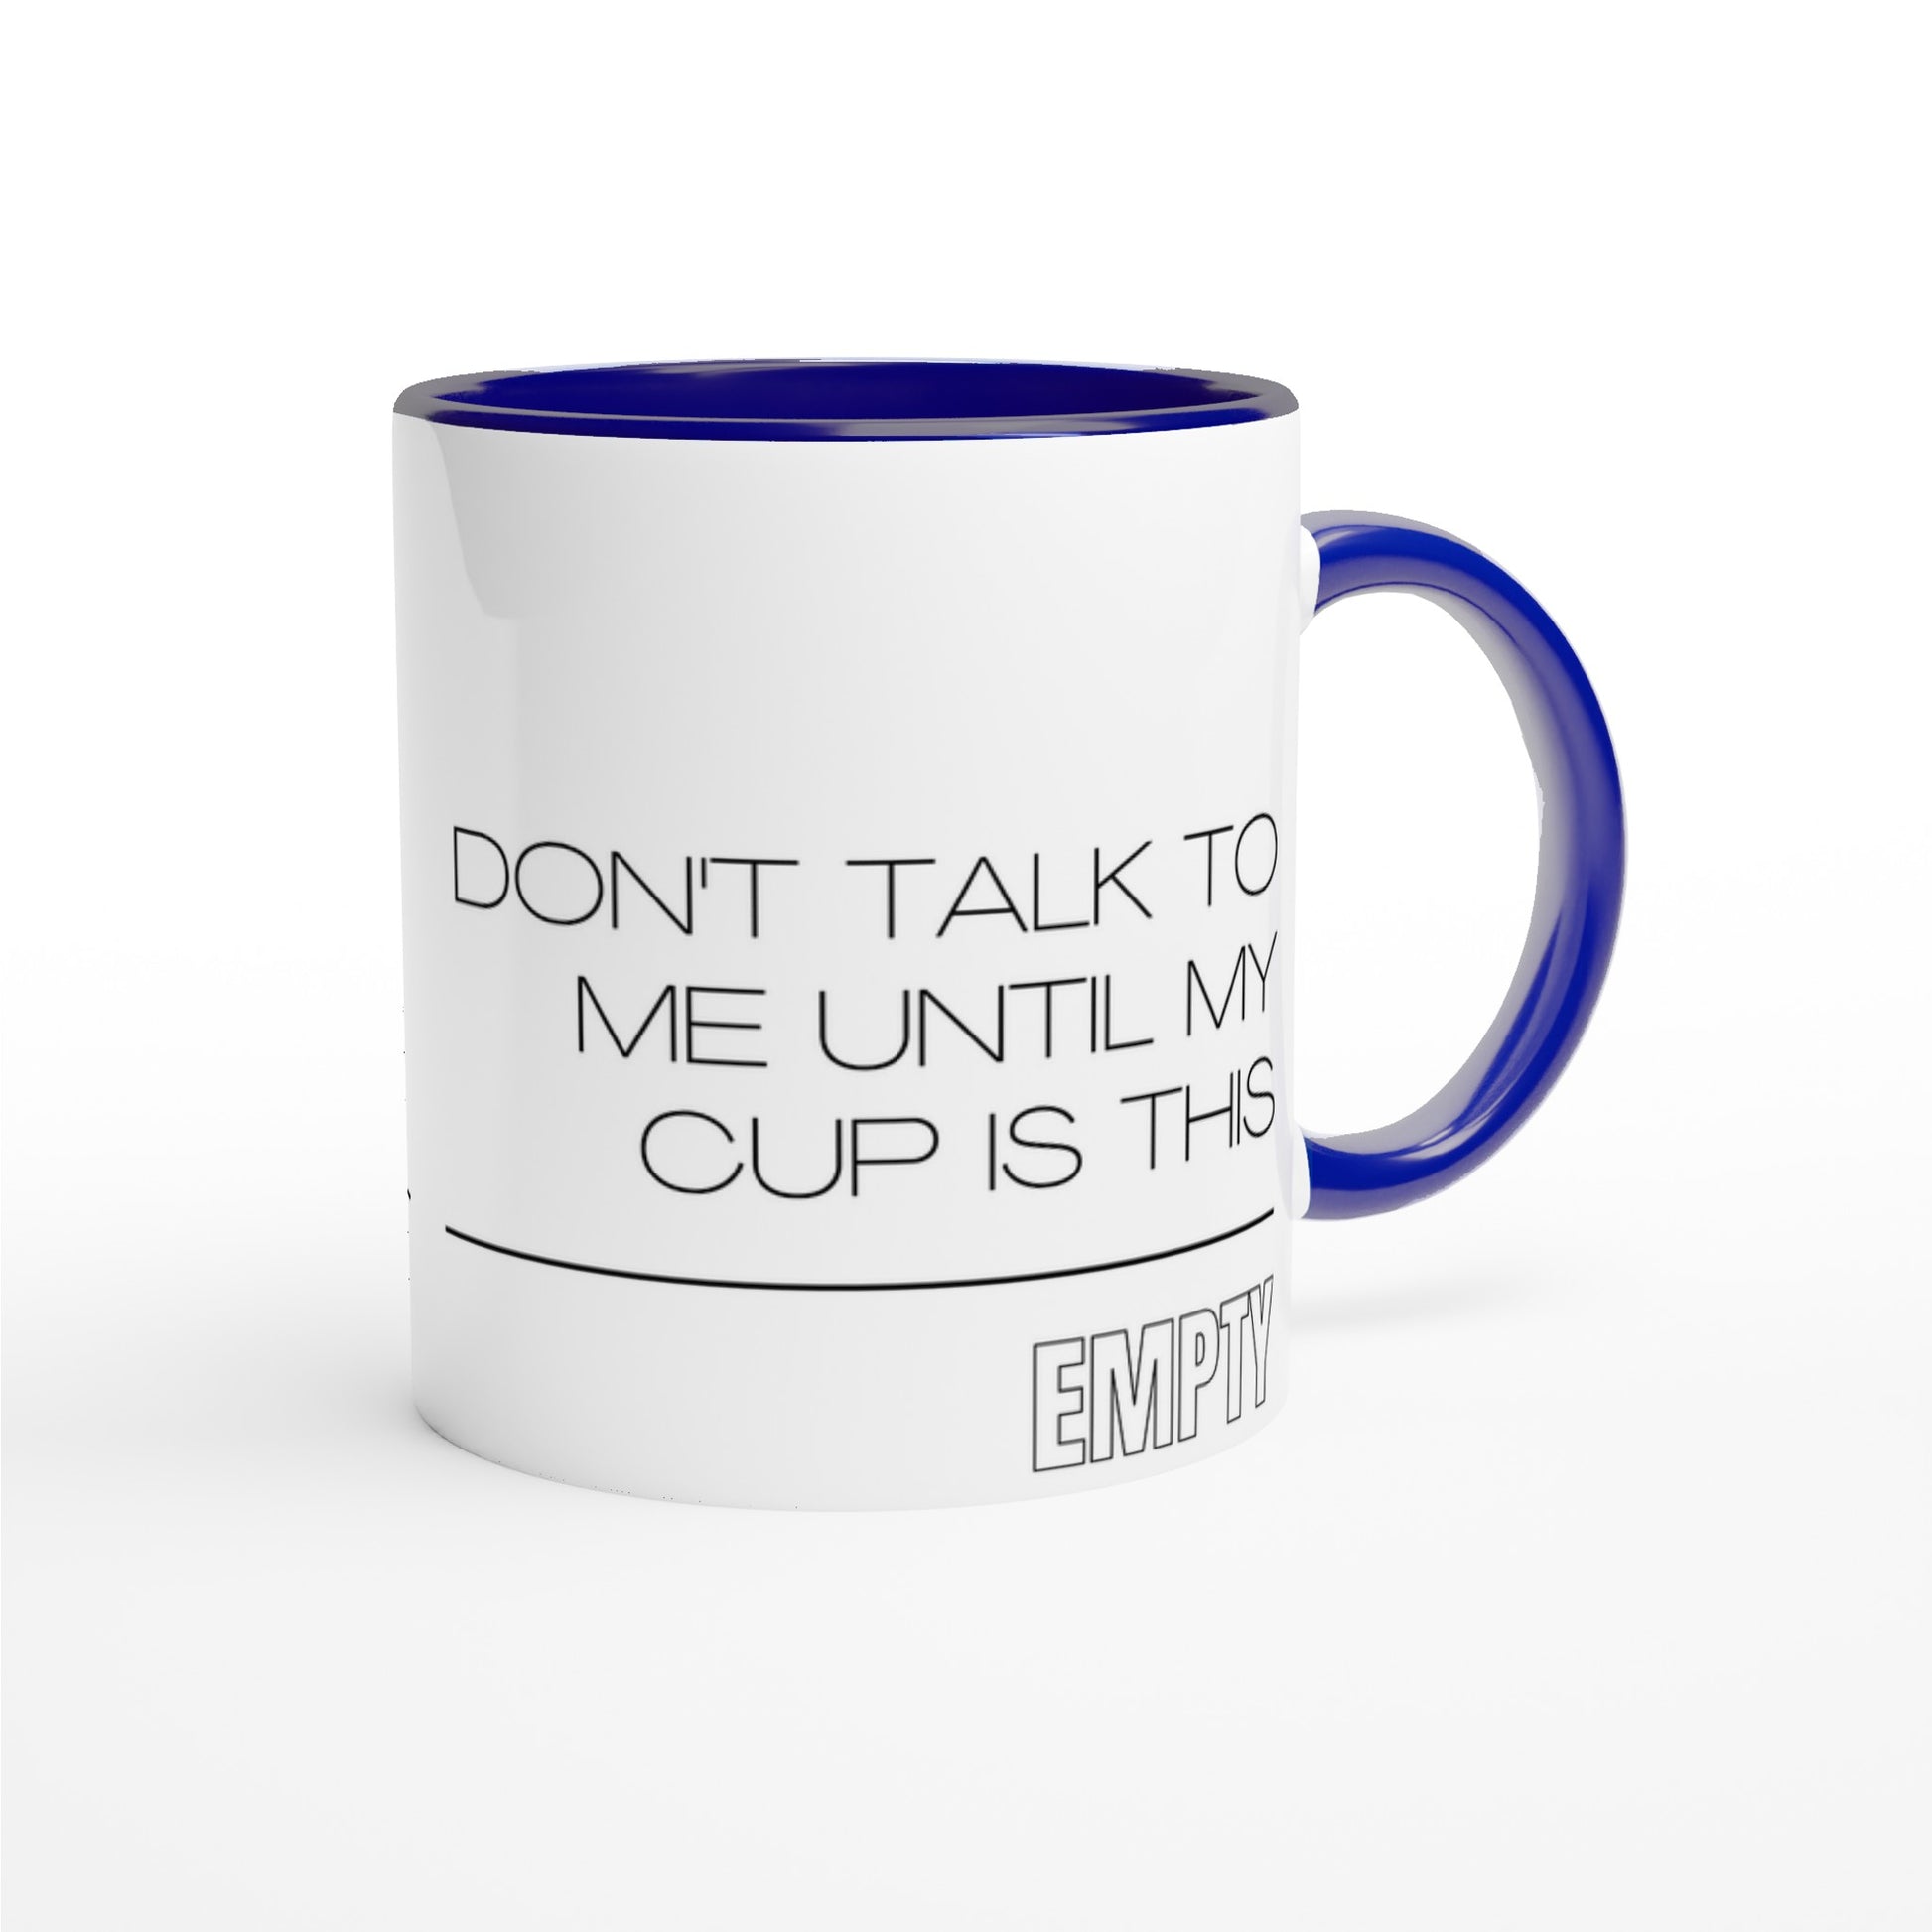 Don't Talk To Me Until My Cup Is This Empty - White 11oz Ceramic Mug with Colour Inside Colour 11oz Mug Coffee Funny